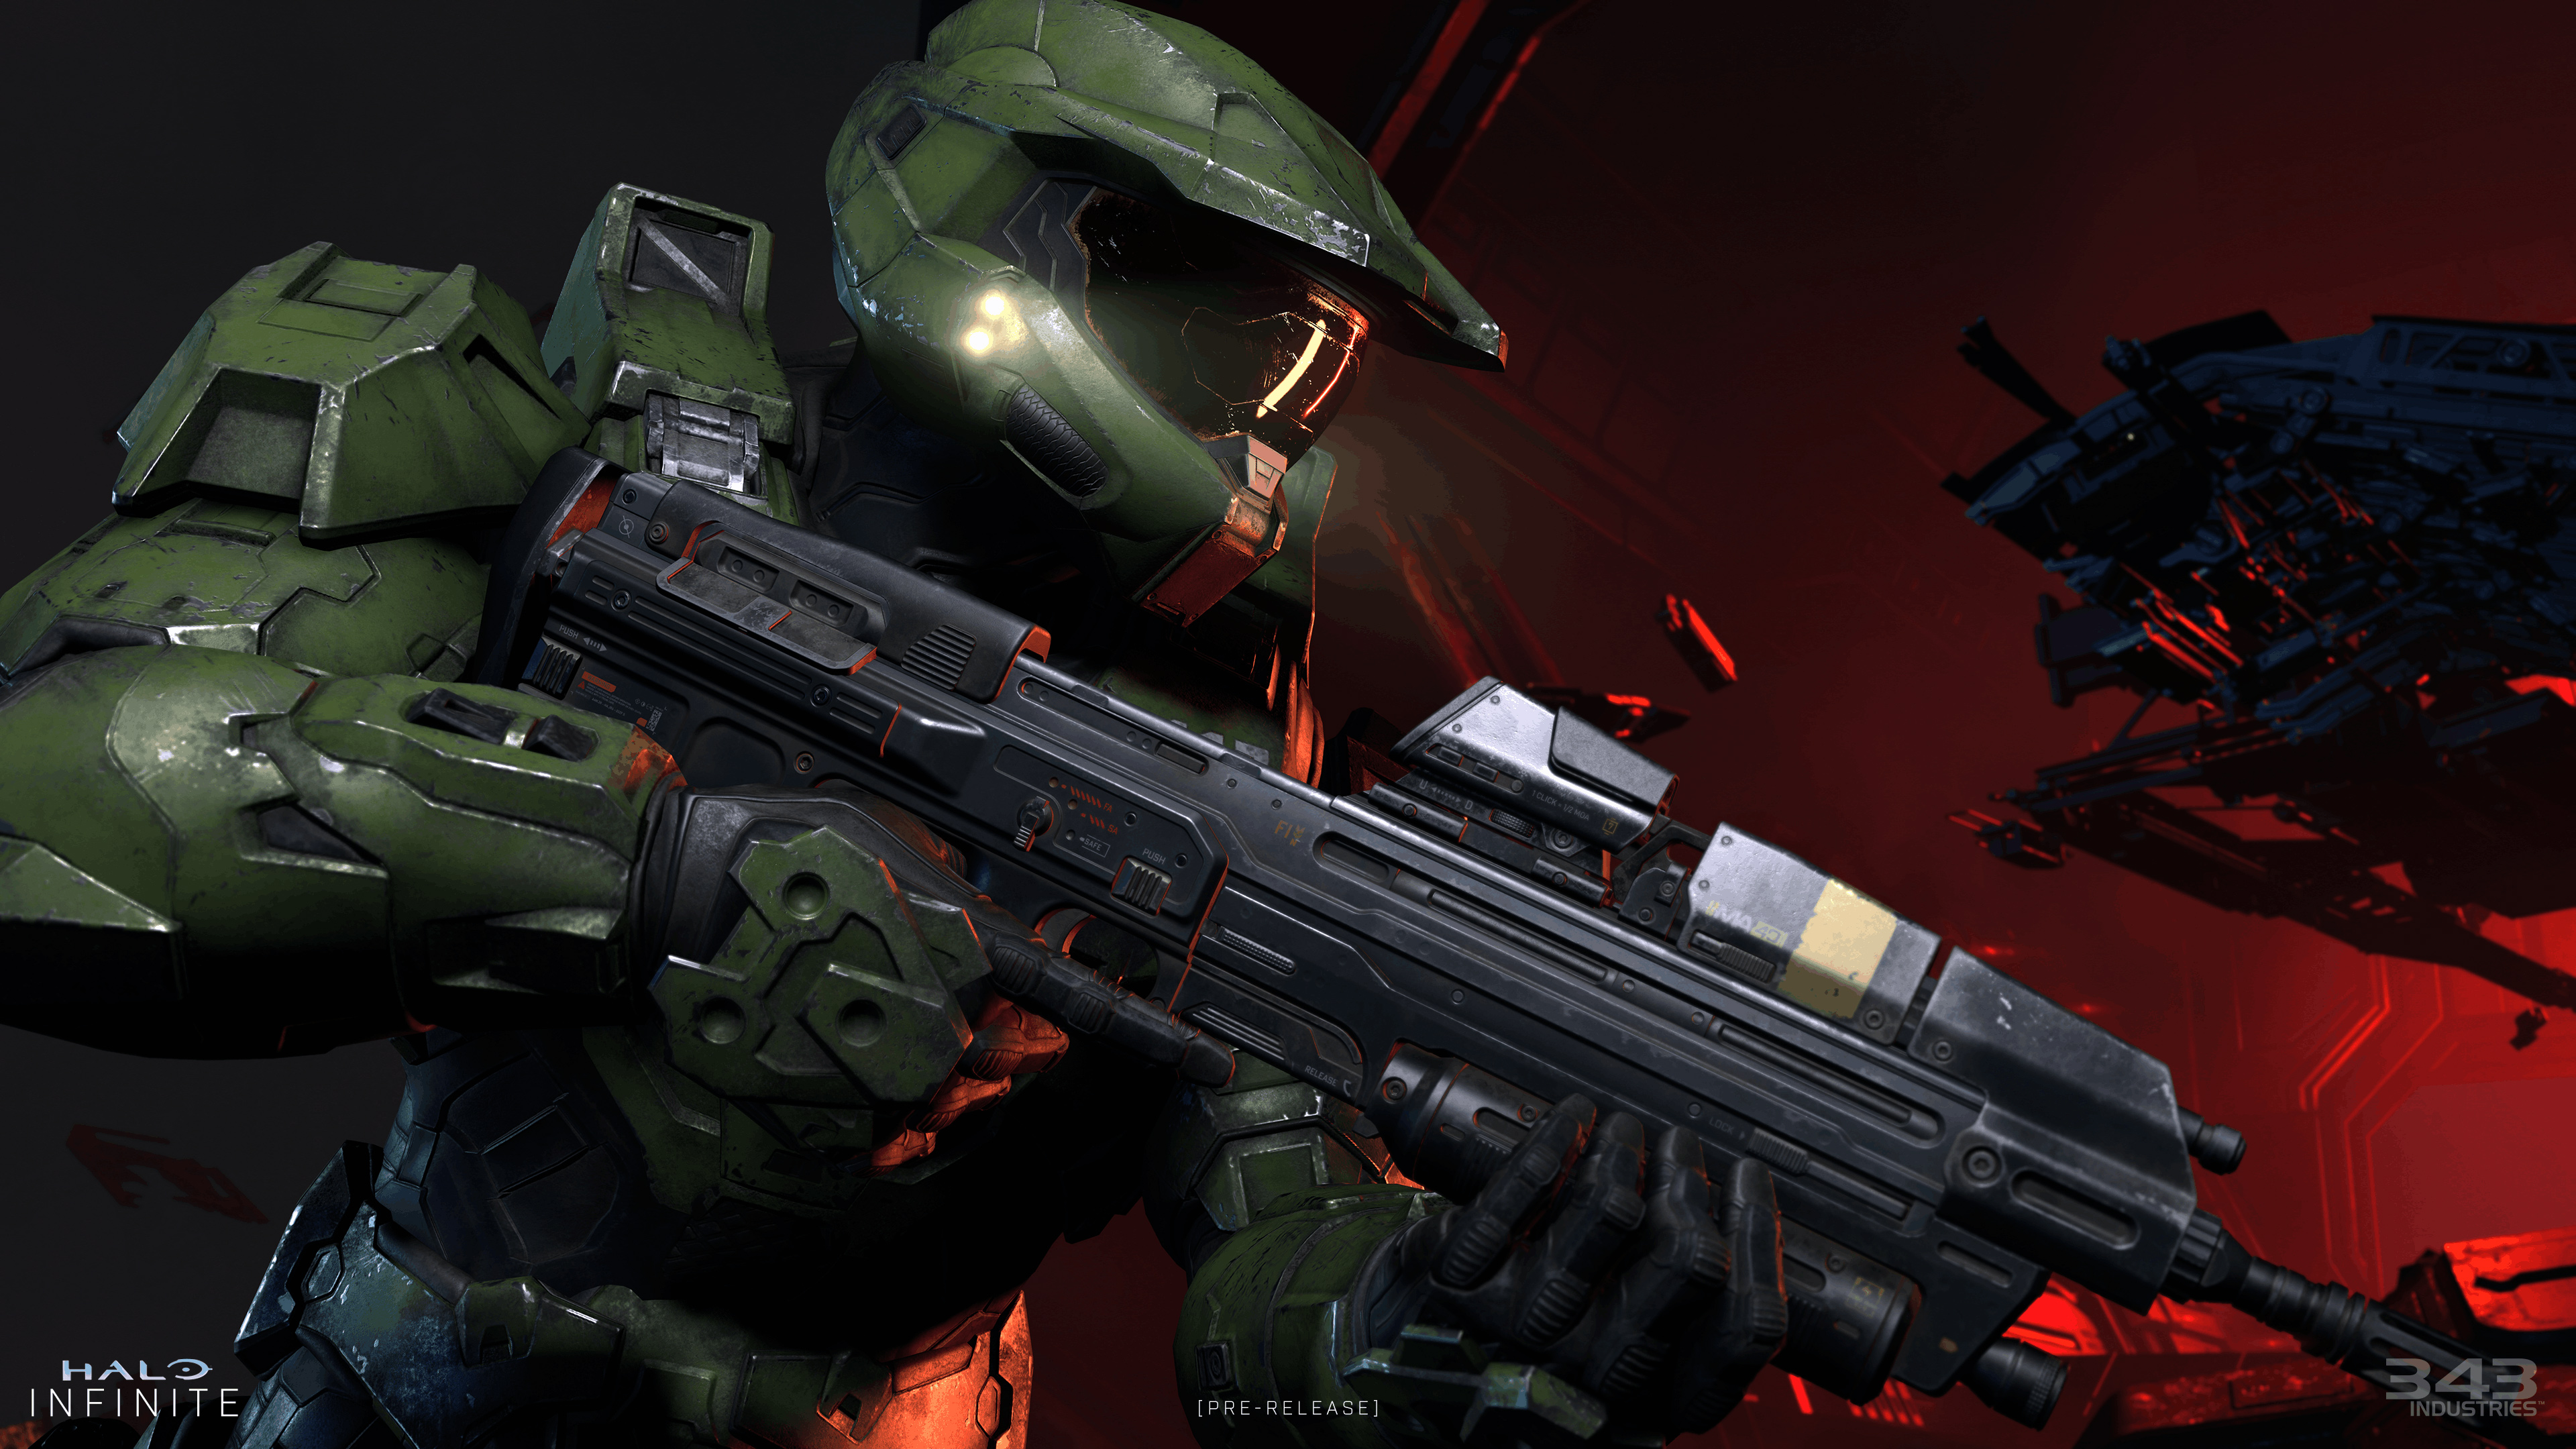 Master Chief holding an MA40 assault rifle in Halo Infinite